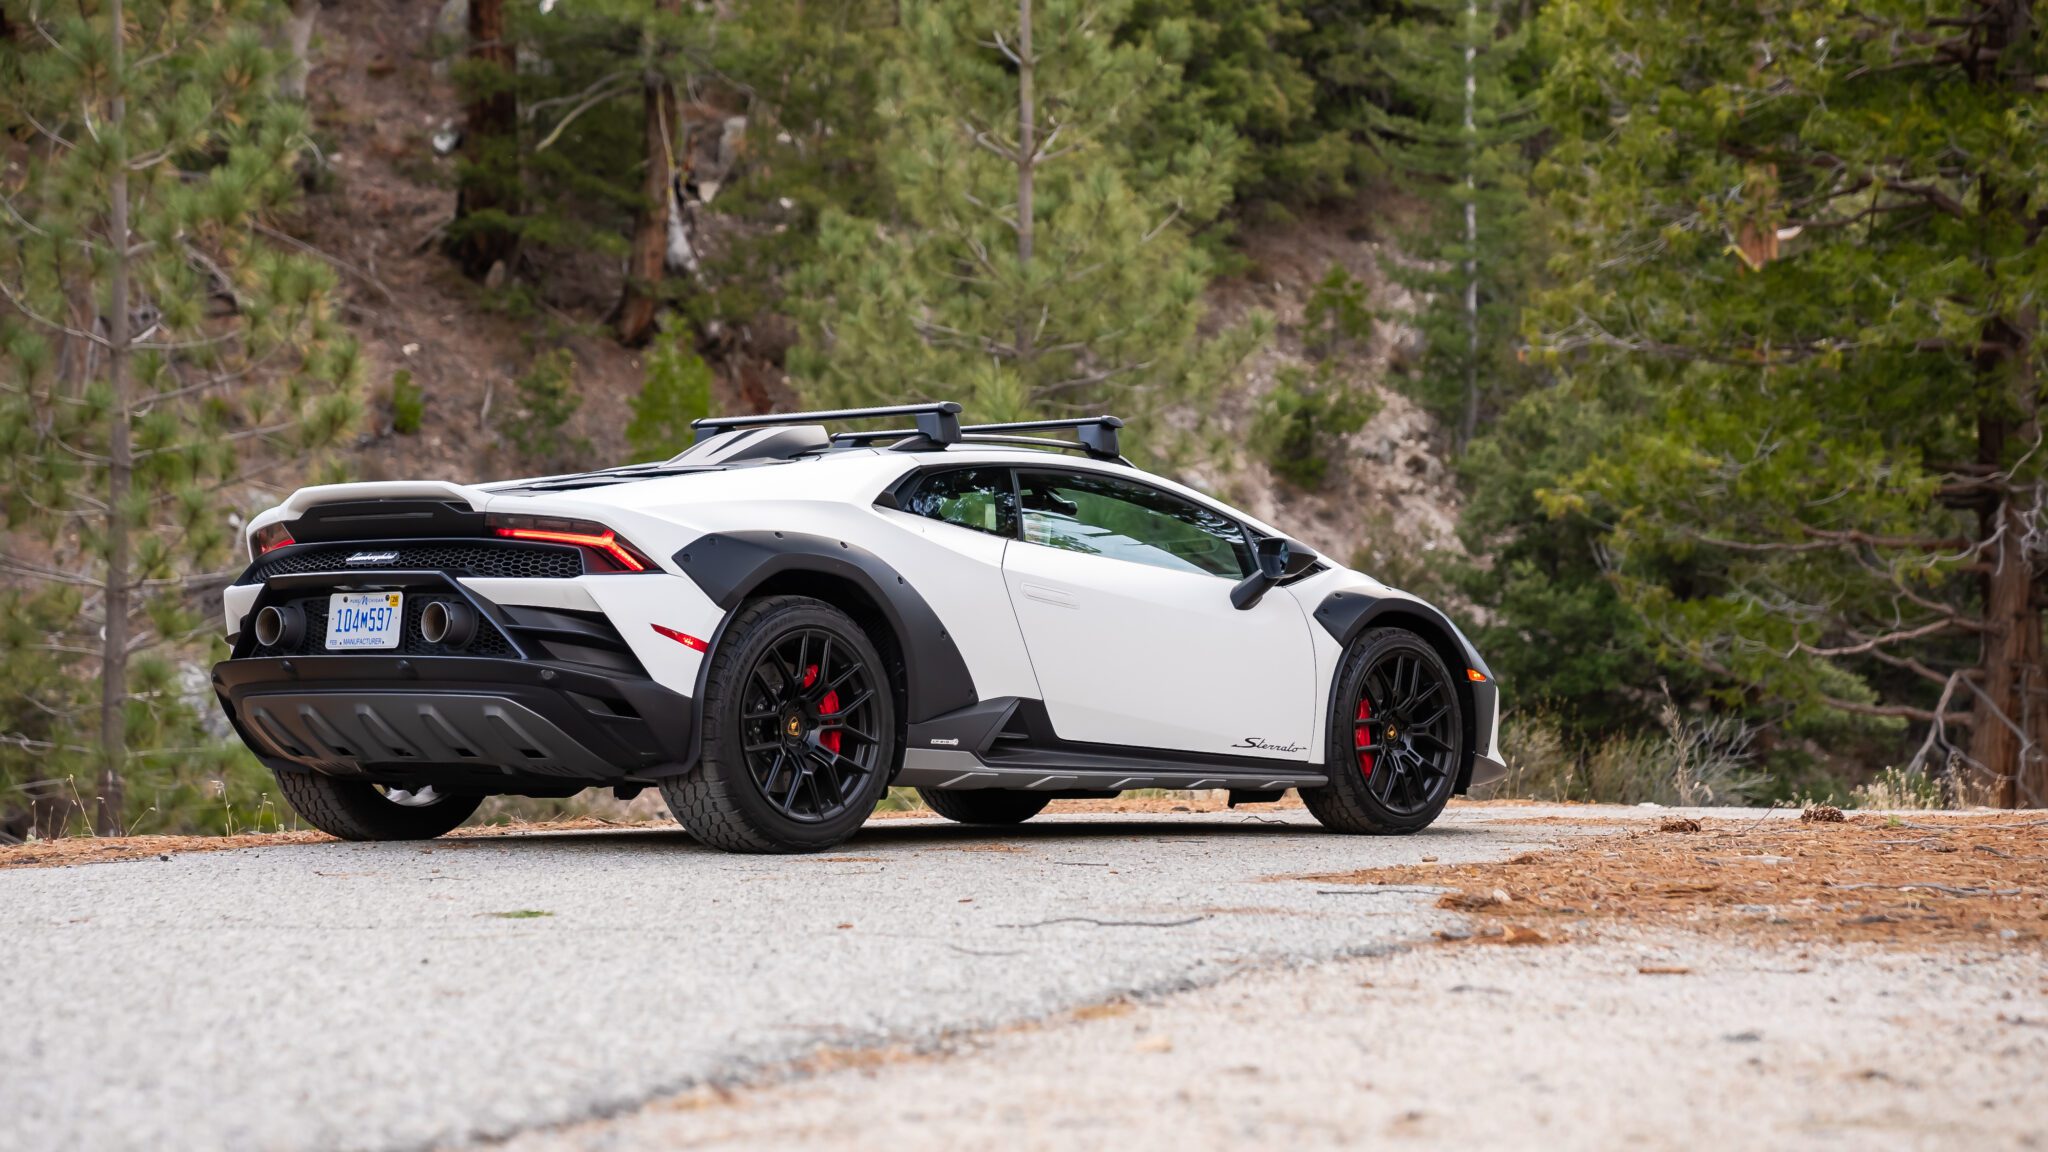 An image of a Lamborghini Huracan Sterrato parked outdoors.